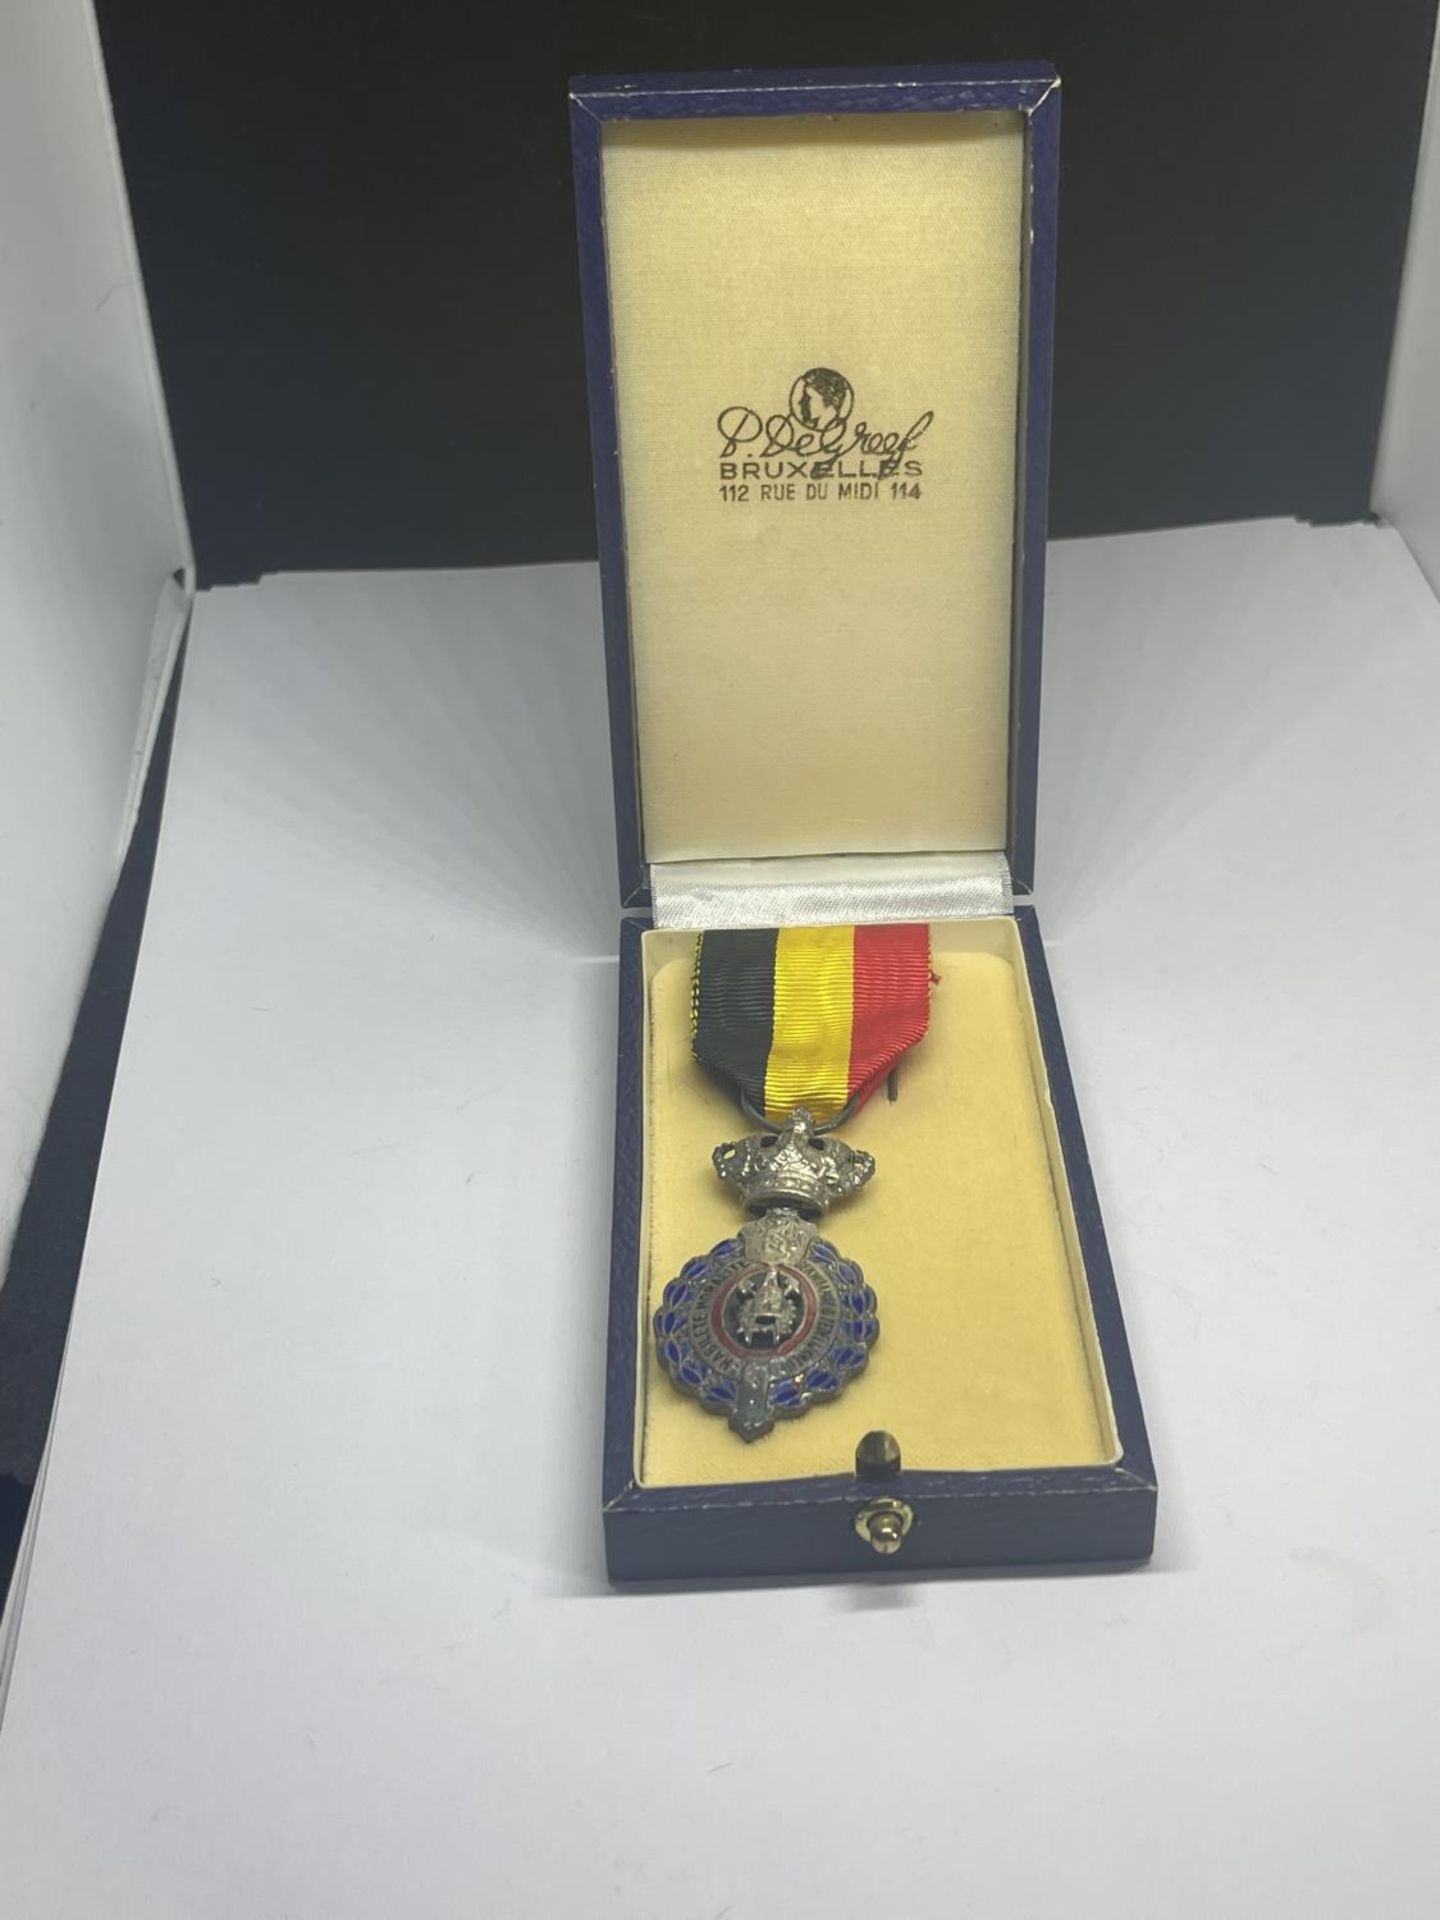 A FRENCH MEDAL IN A PRESENTATION BOX